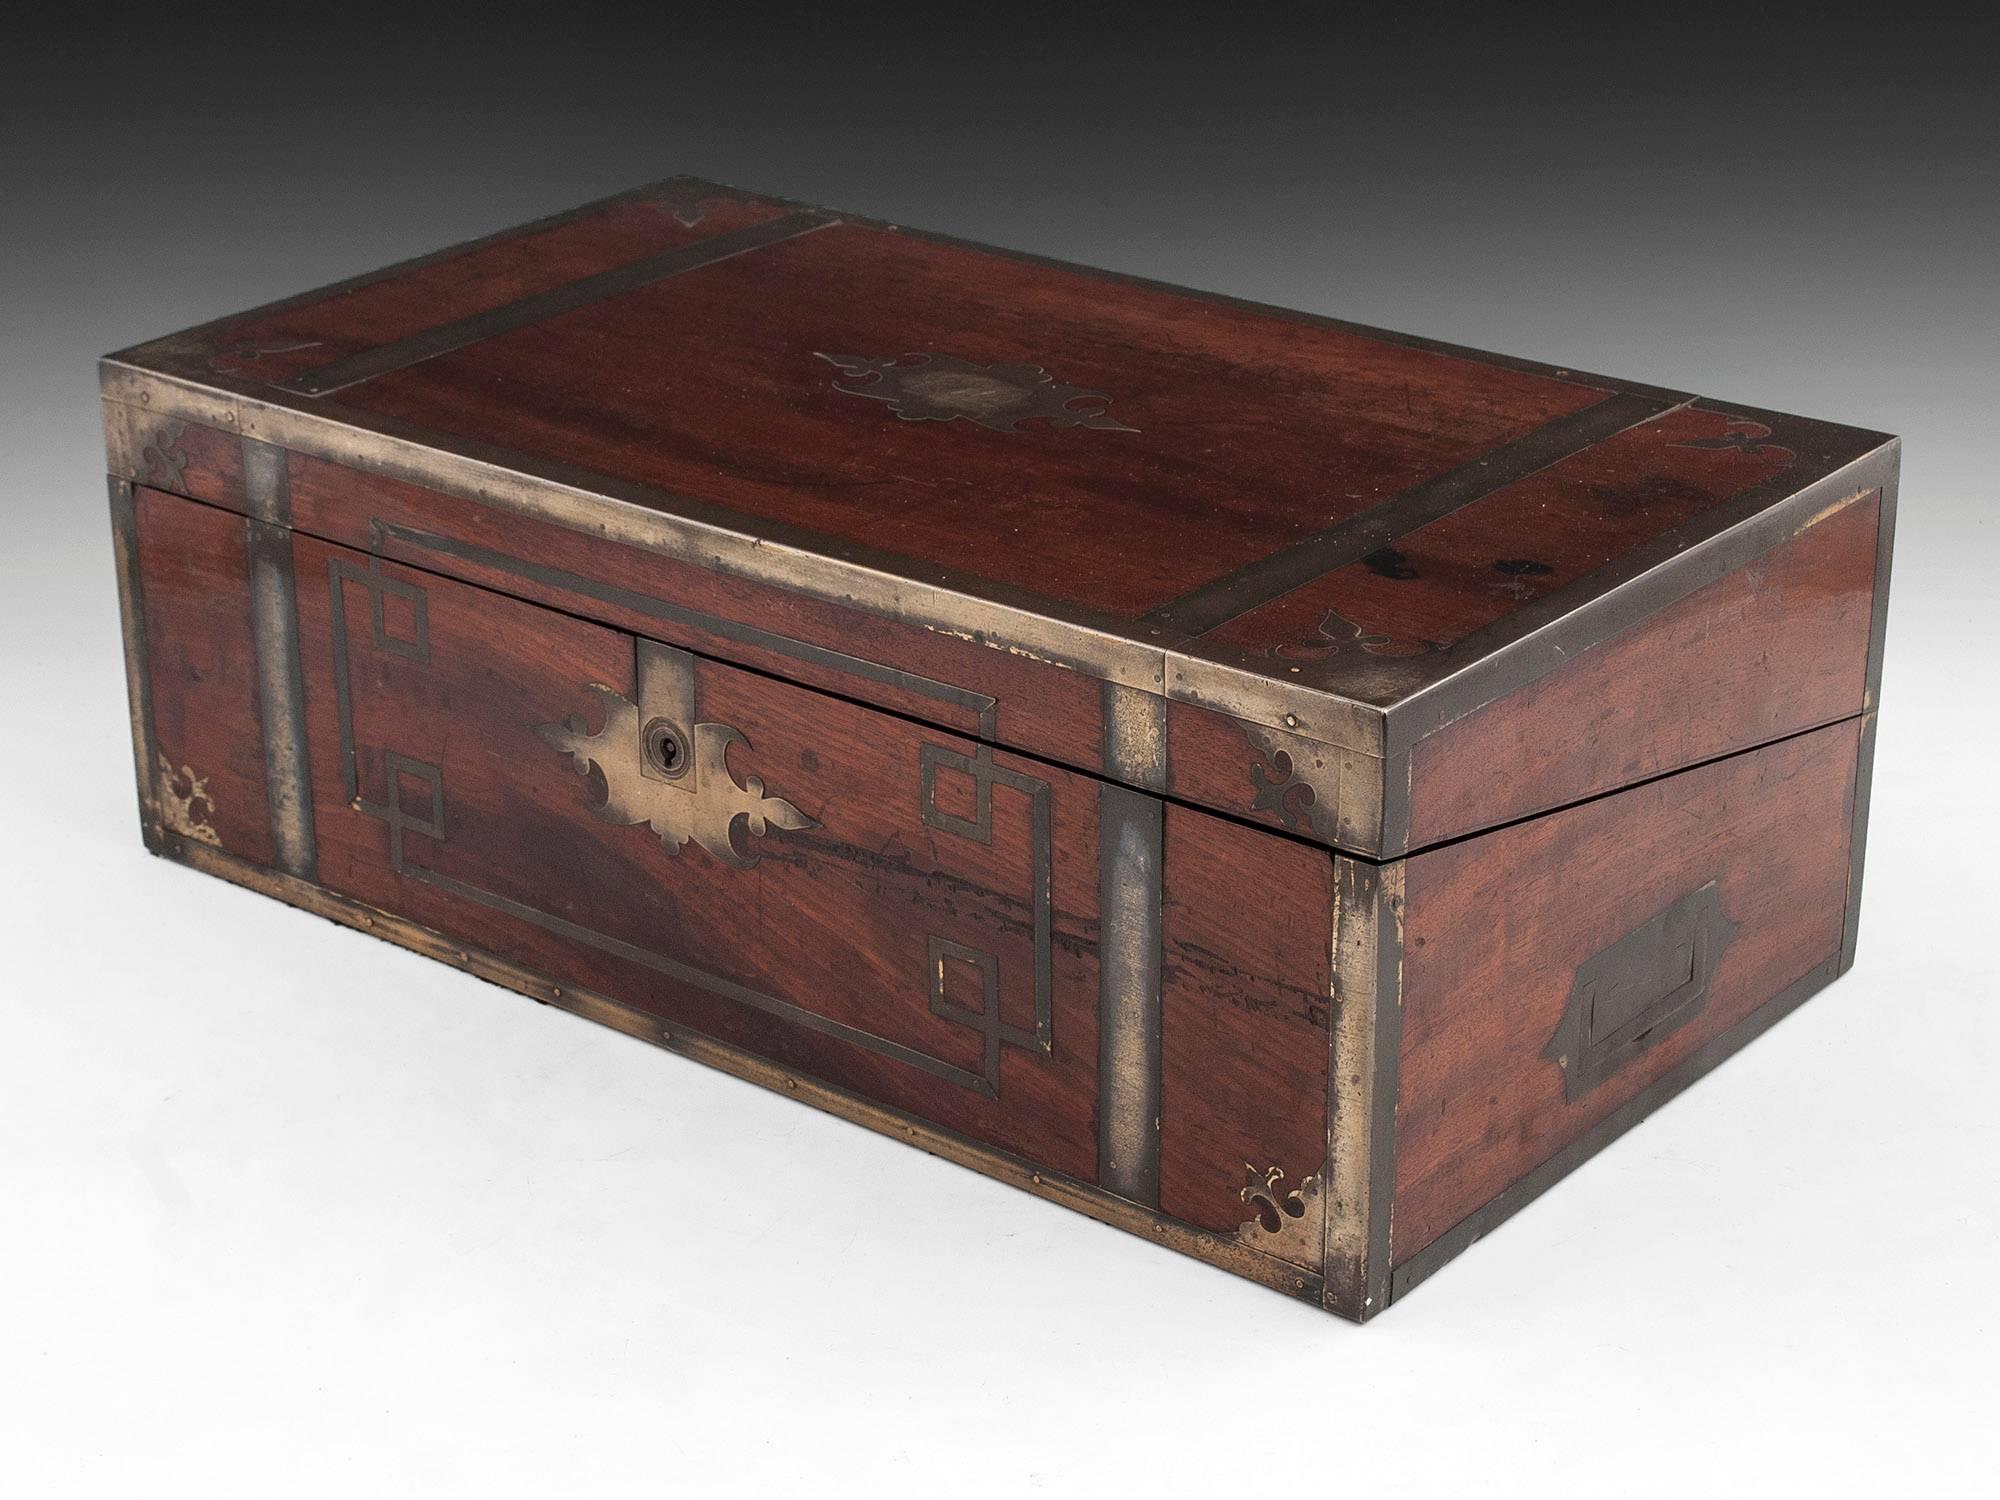 Military writing box with made of solid mahogany with brass stringing, edging, ornate initial plate and flush fitting Campaign carrying handles.

The interior features a replacement black leather and gold tooled writing surface, a brass top